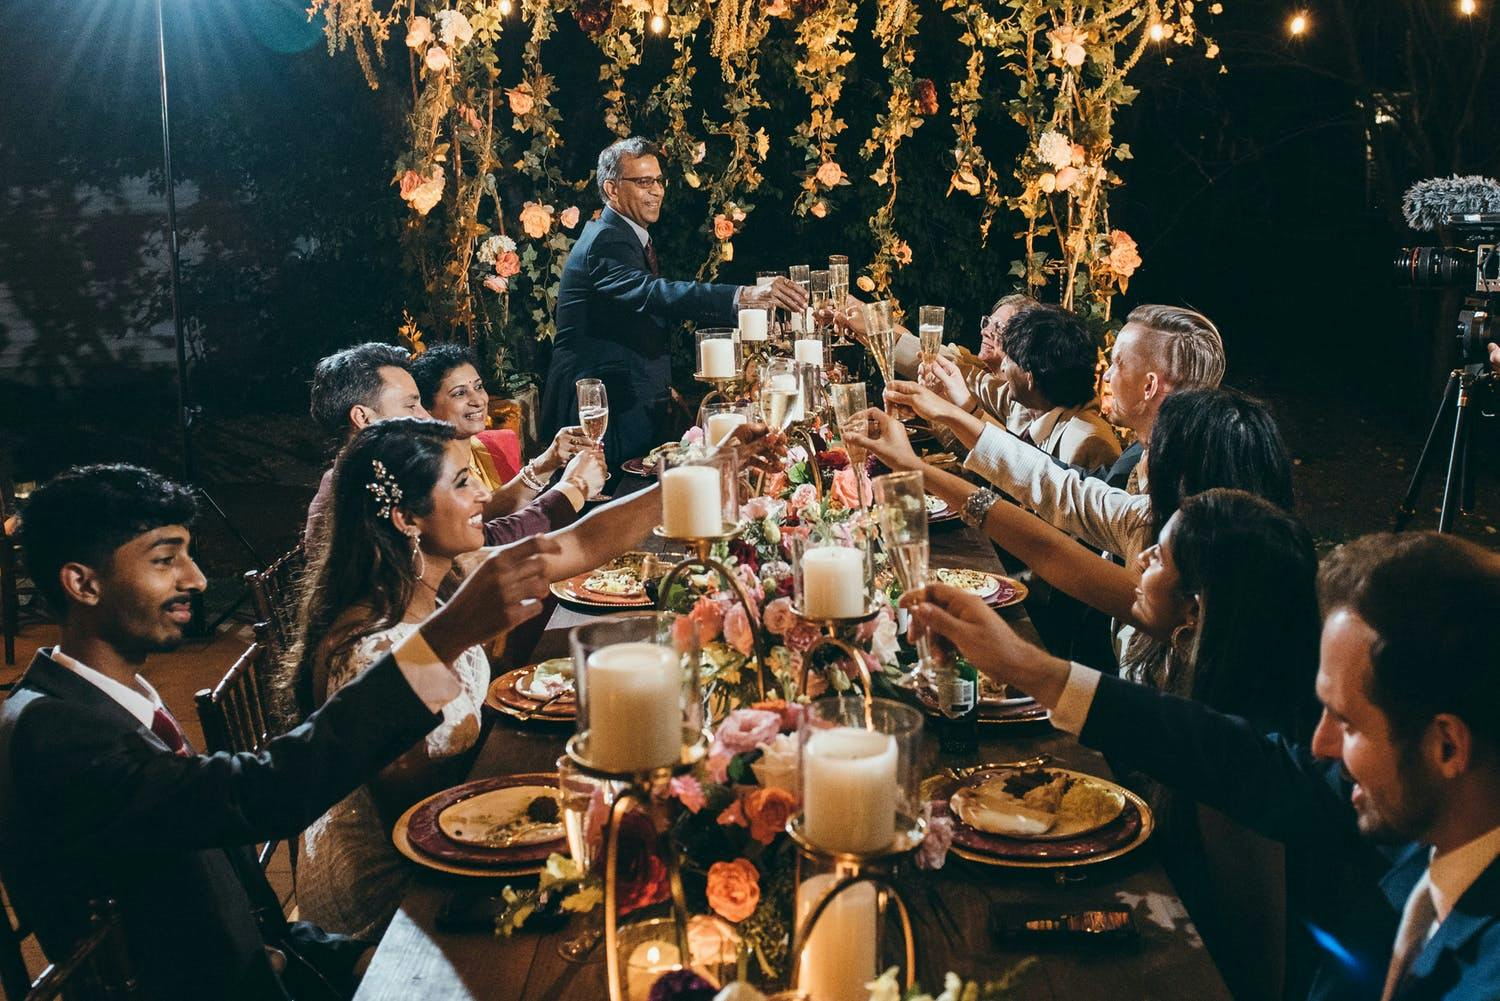 Night time wedding reception with king's table laden in candlelight and a floral installation at one end | PartySlate